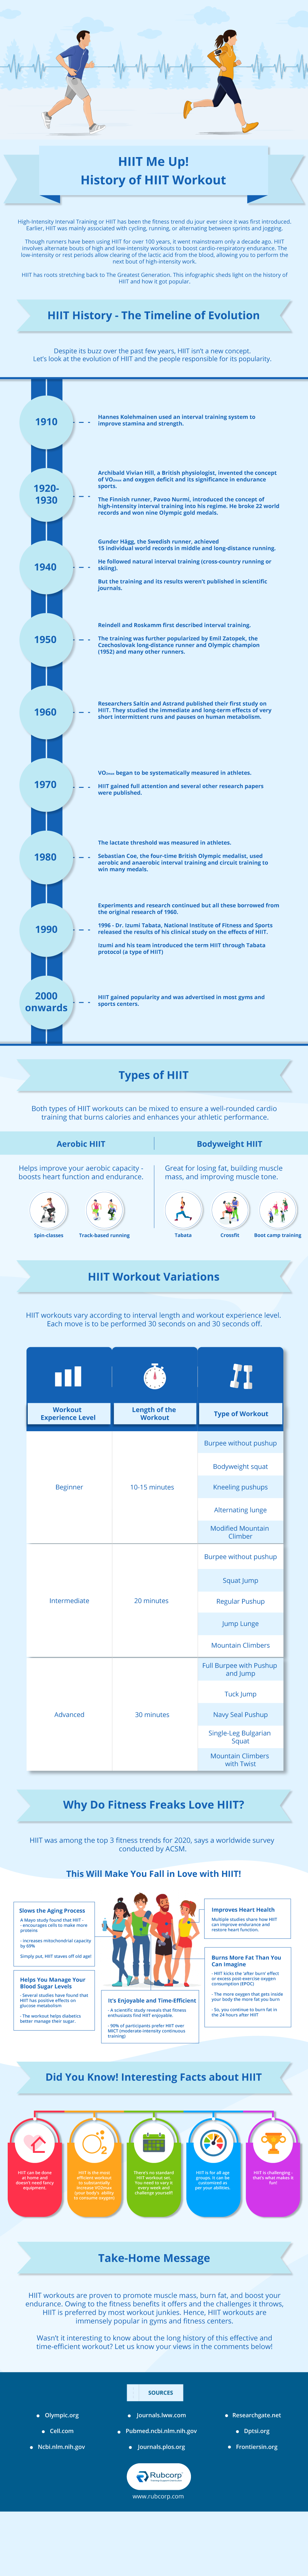 history of hiit